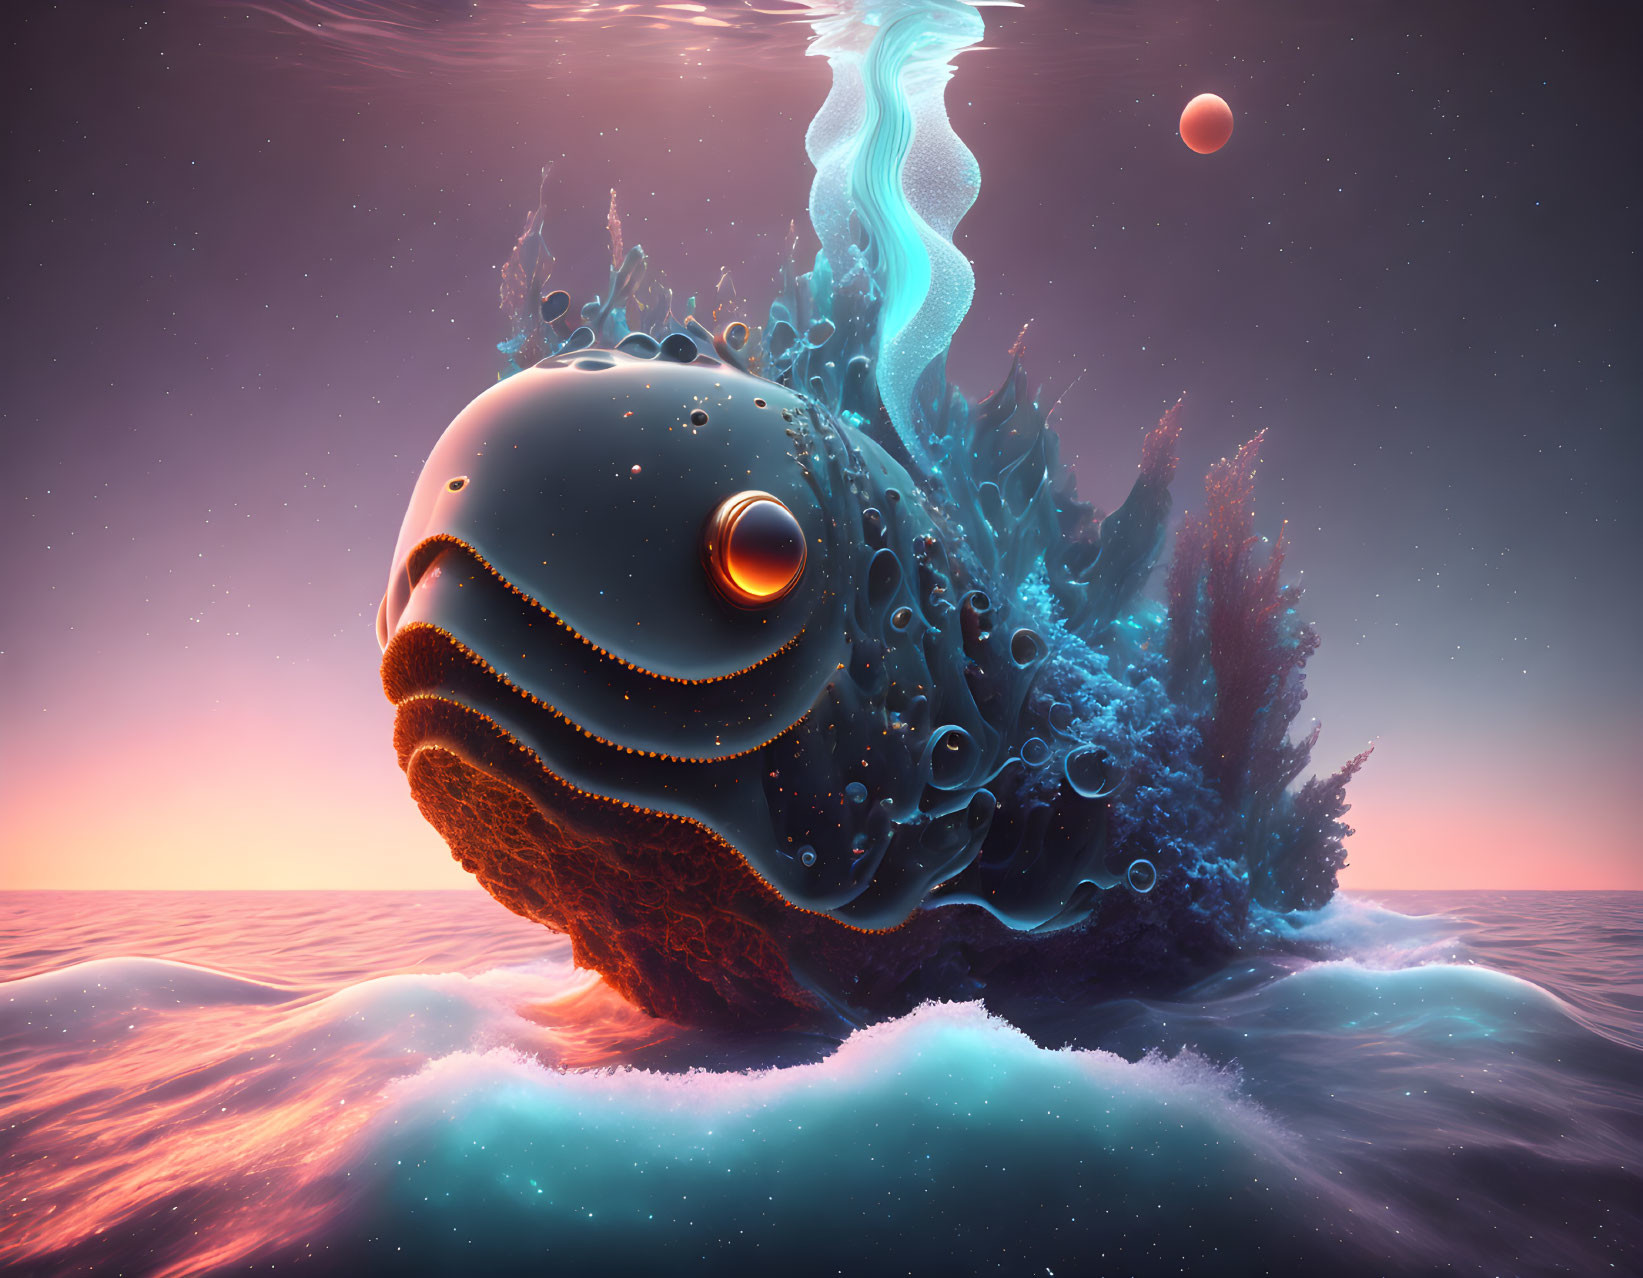 Fantastical floating creature with eye in surreal ocean sunset.